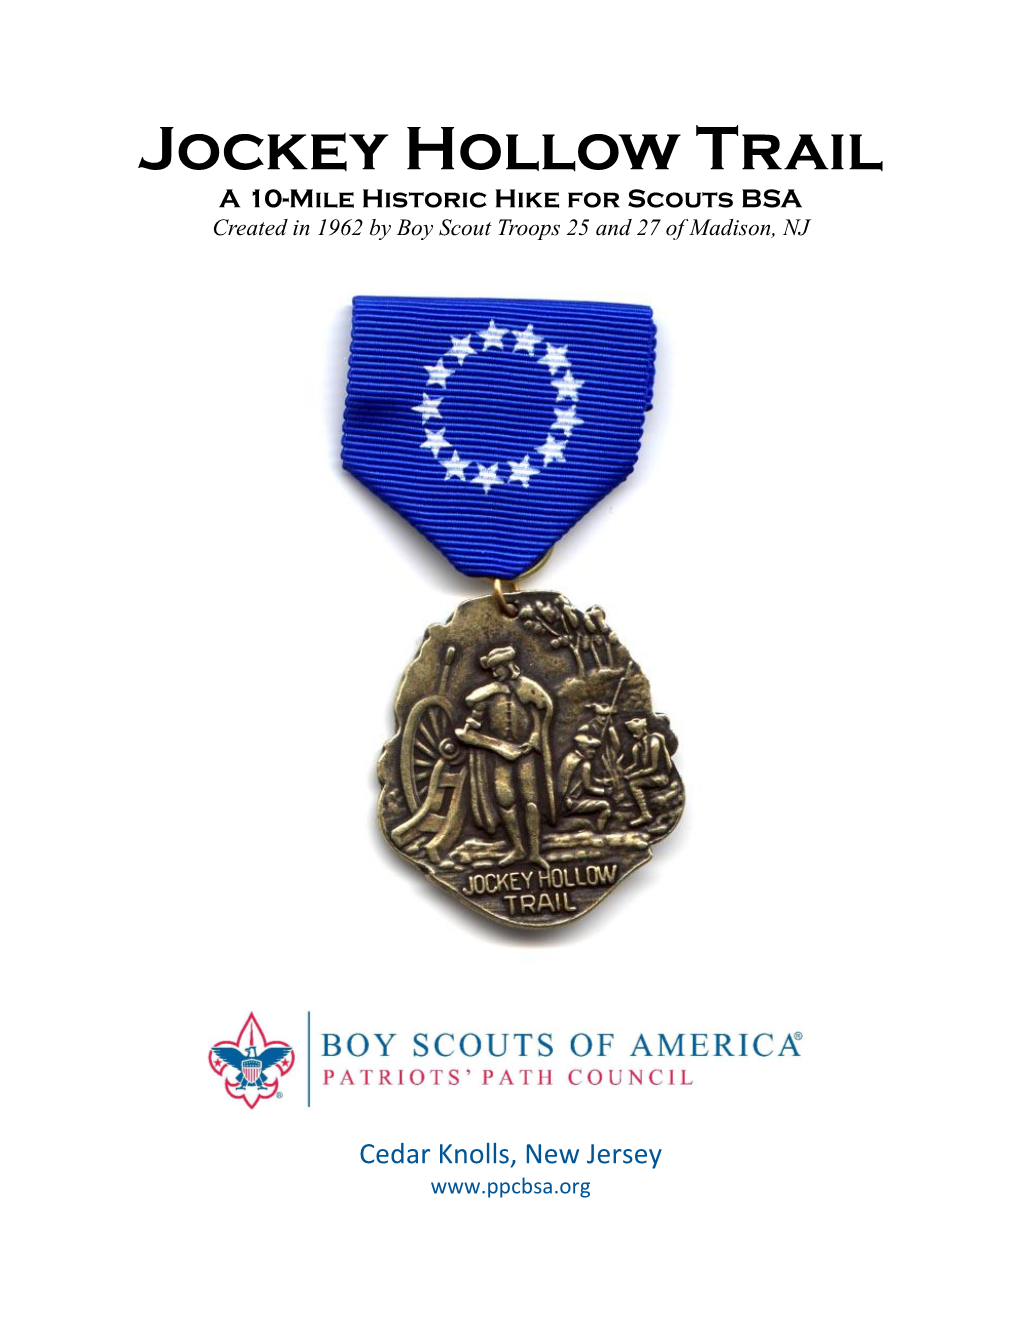 The Jockey Hollow Trail for Scouts BSA